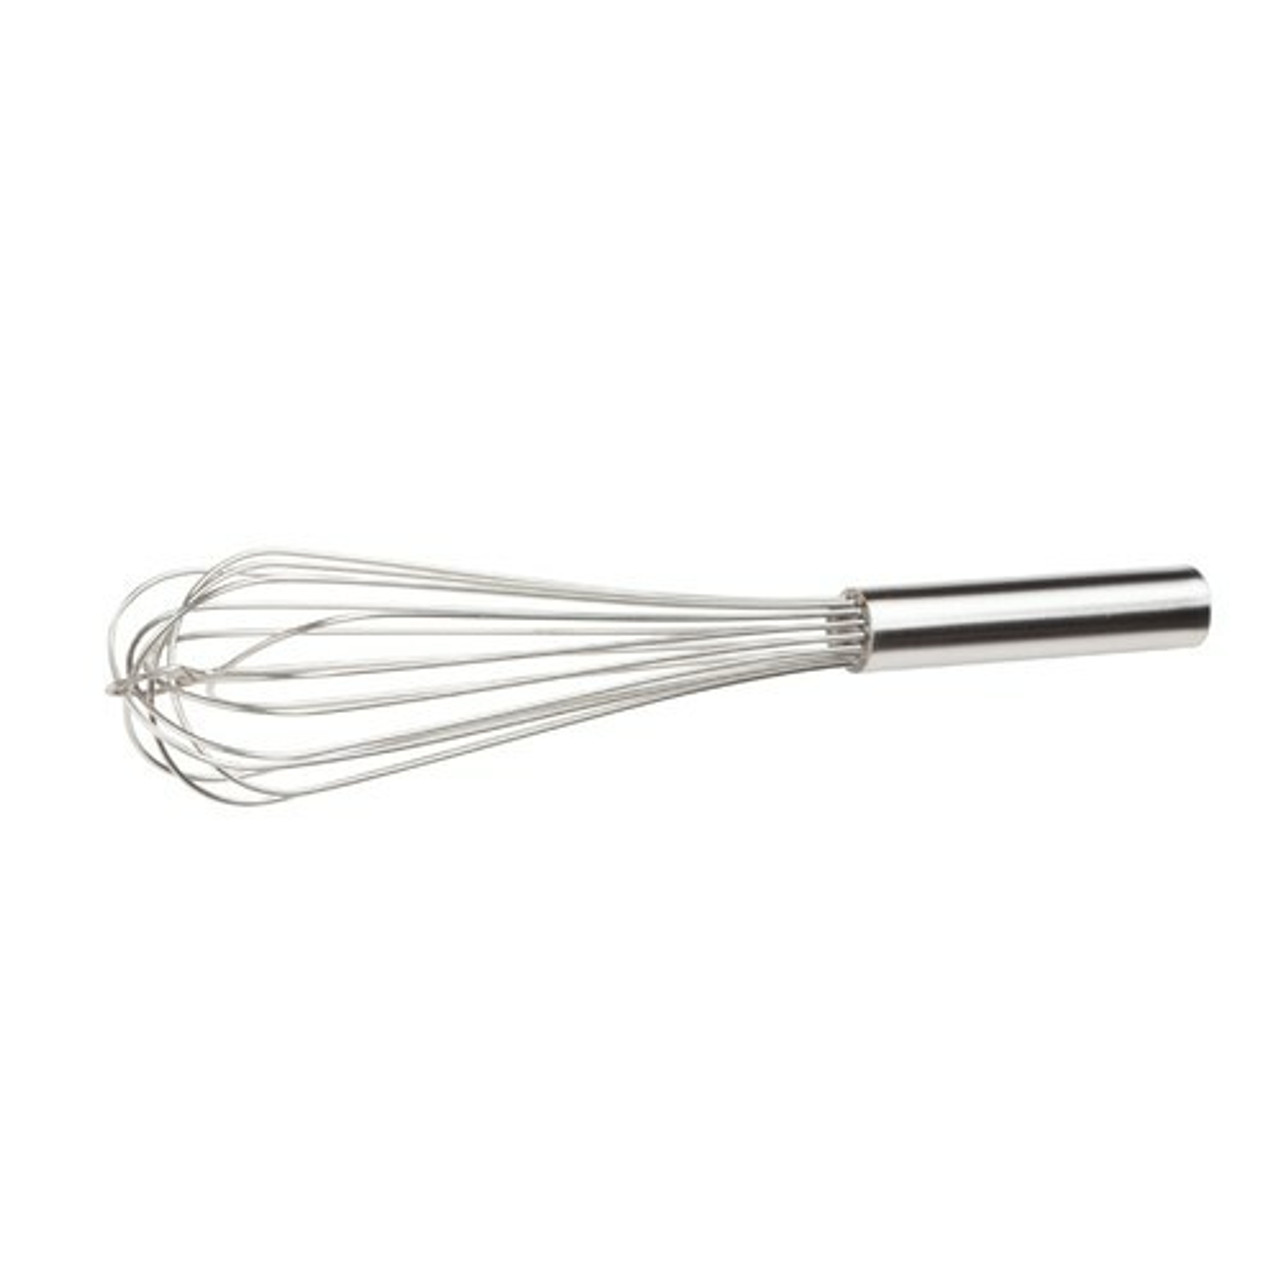 French Whip, 16" long, stainless steel